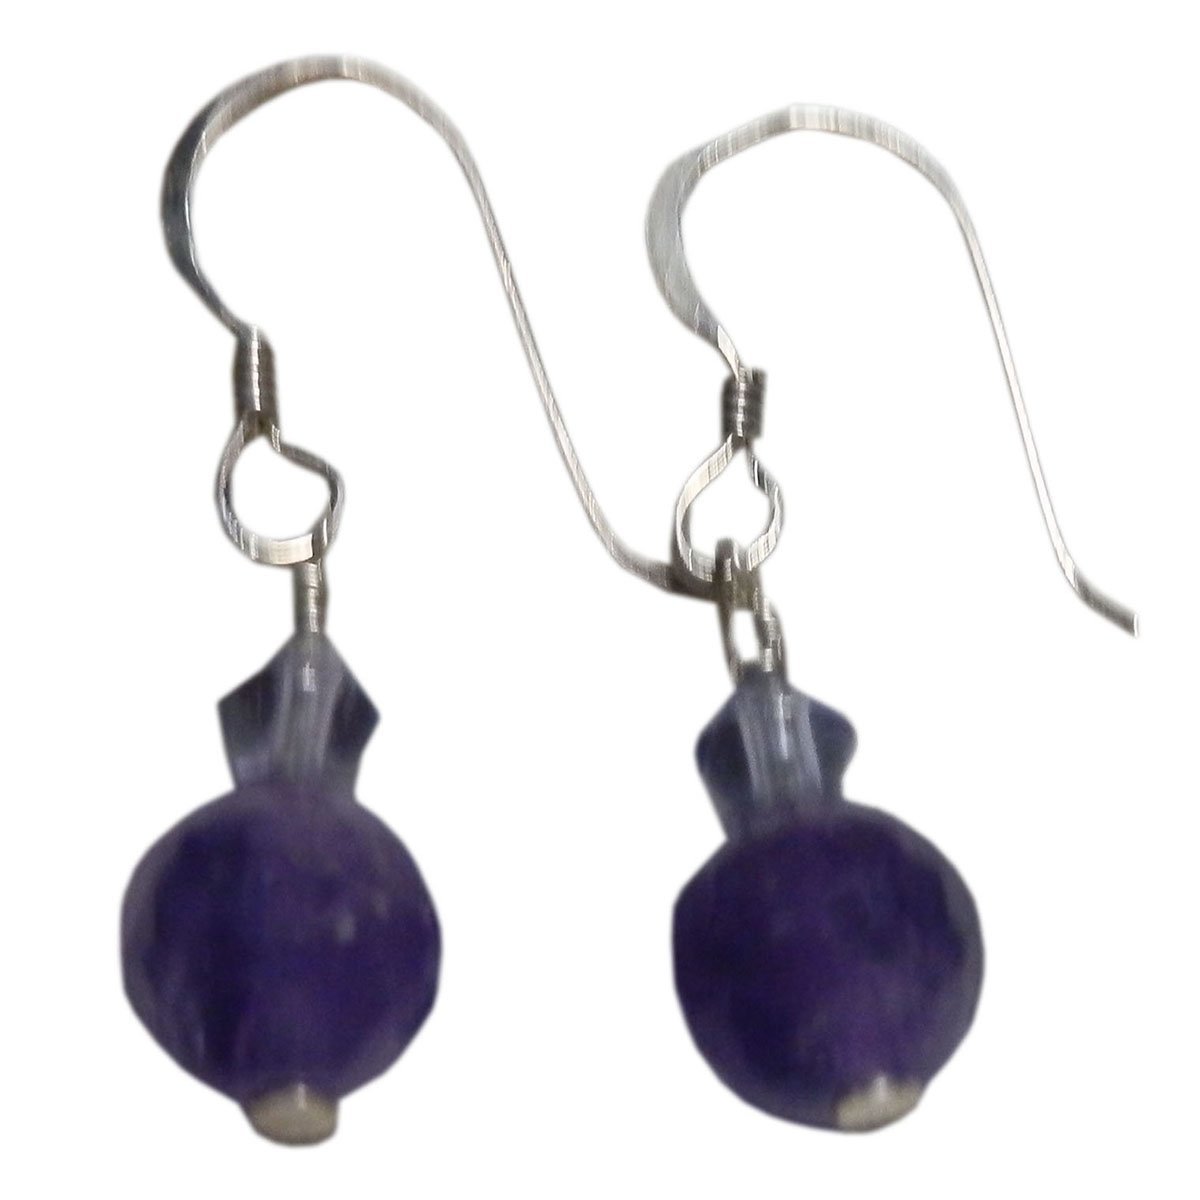 ■☆Handmade accessories Silver earrings with amethyst (HDP-22), Earrings, Colored Stones, amethyst